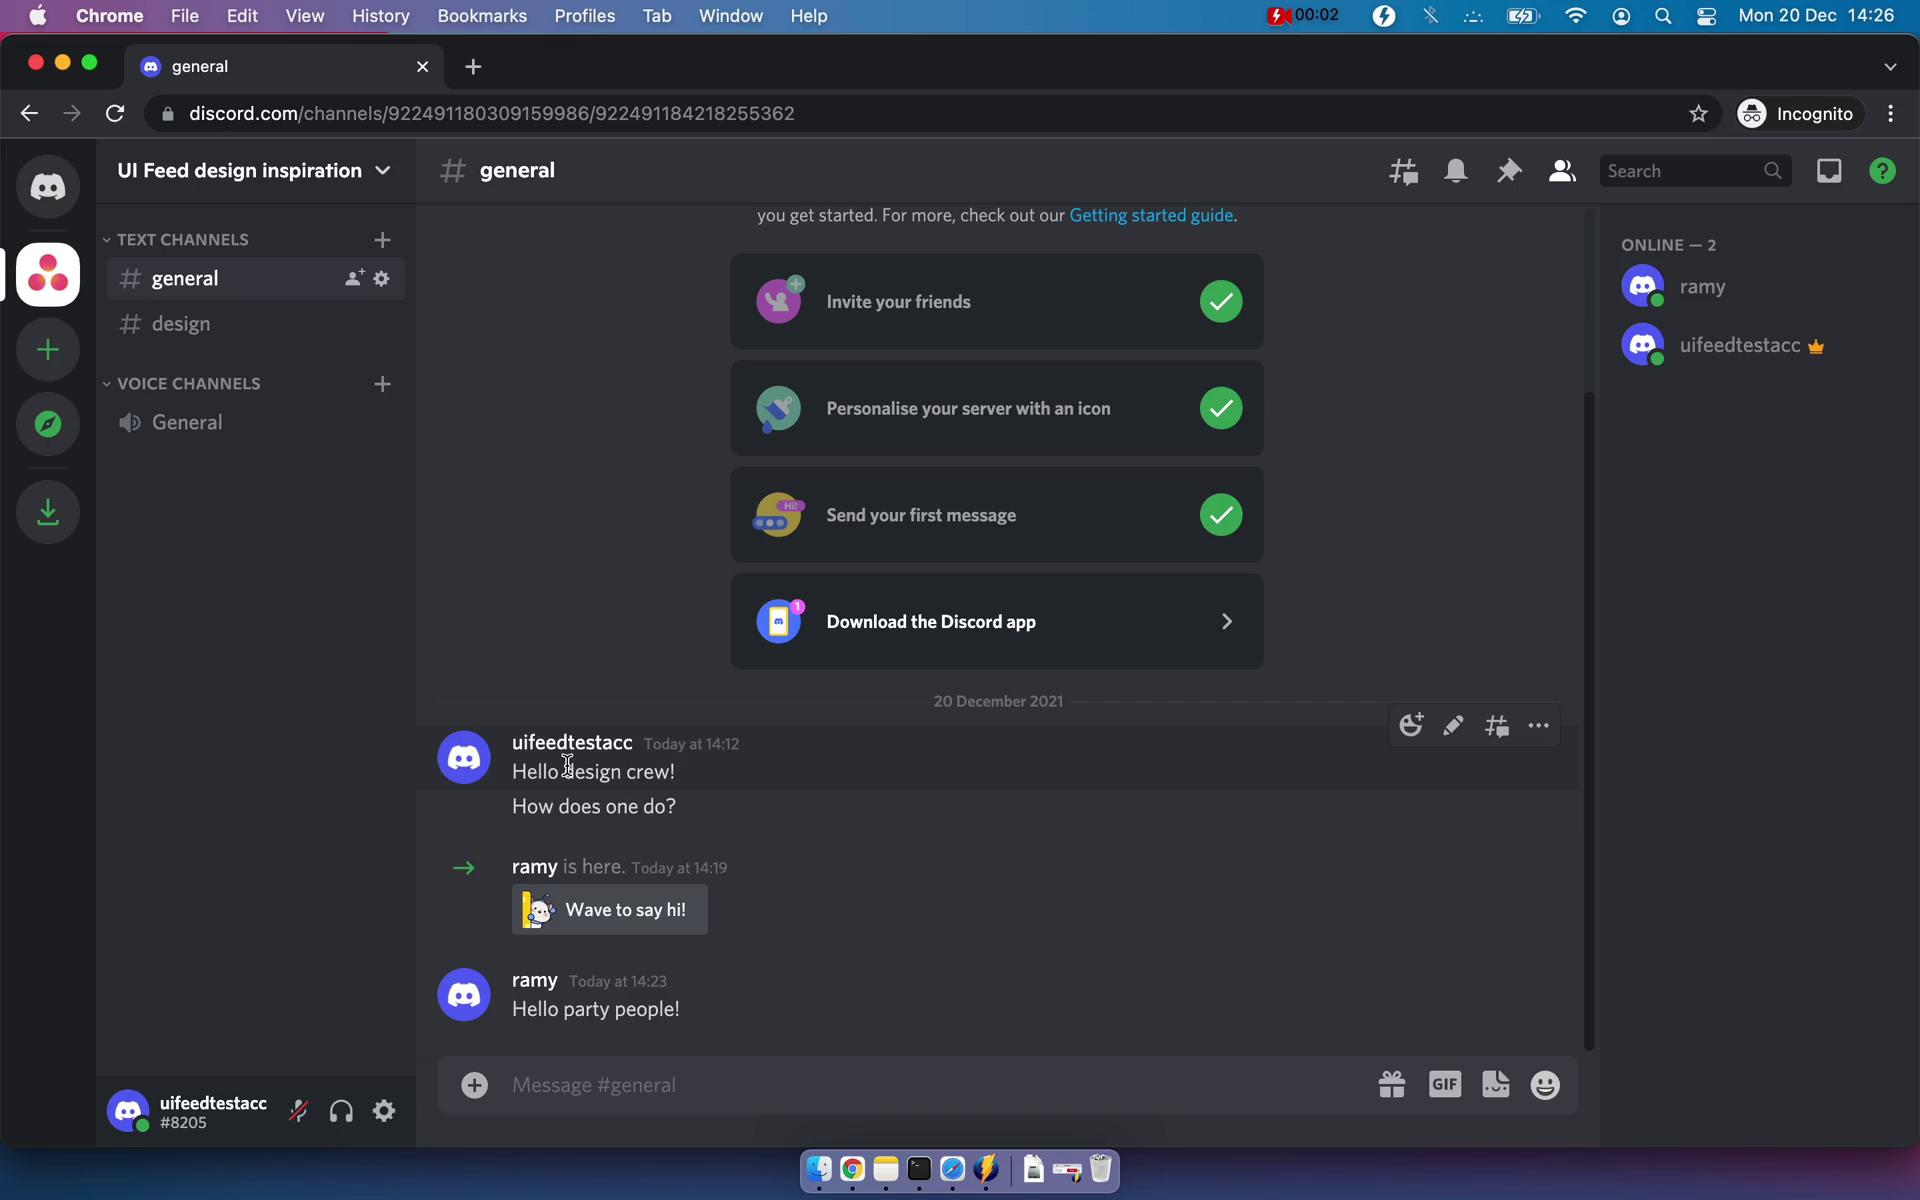 Updating your profile on Discord video screenshot